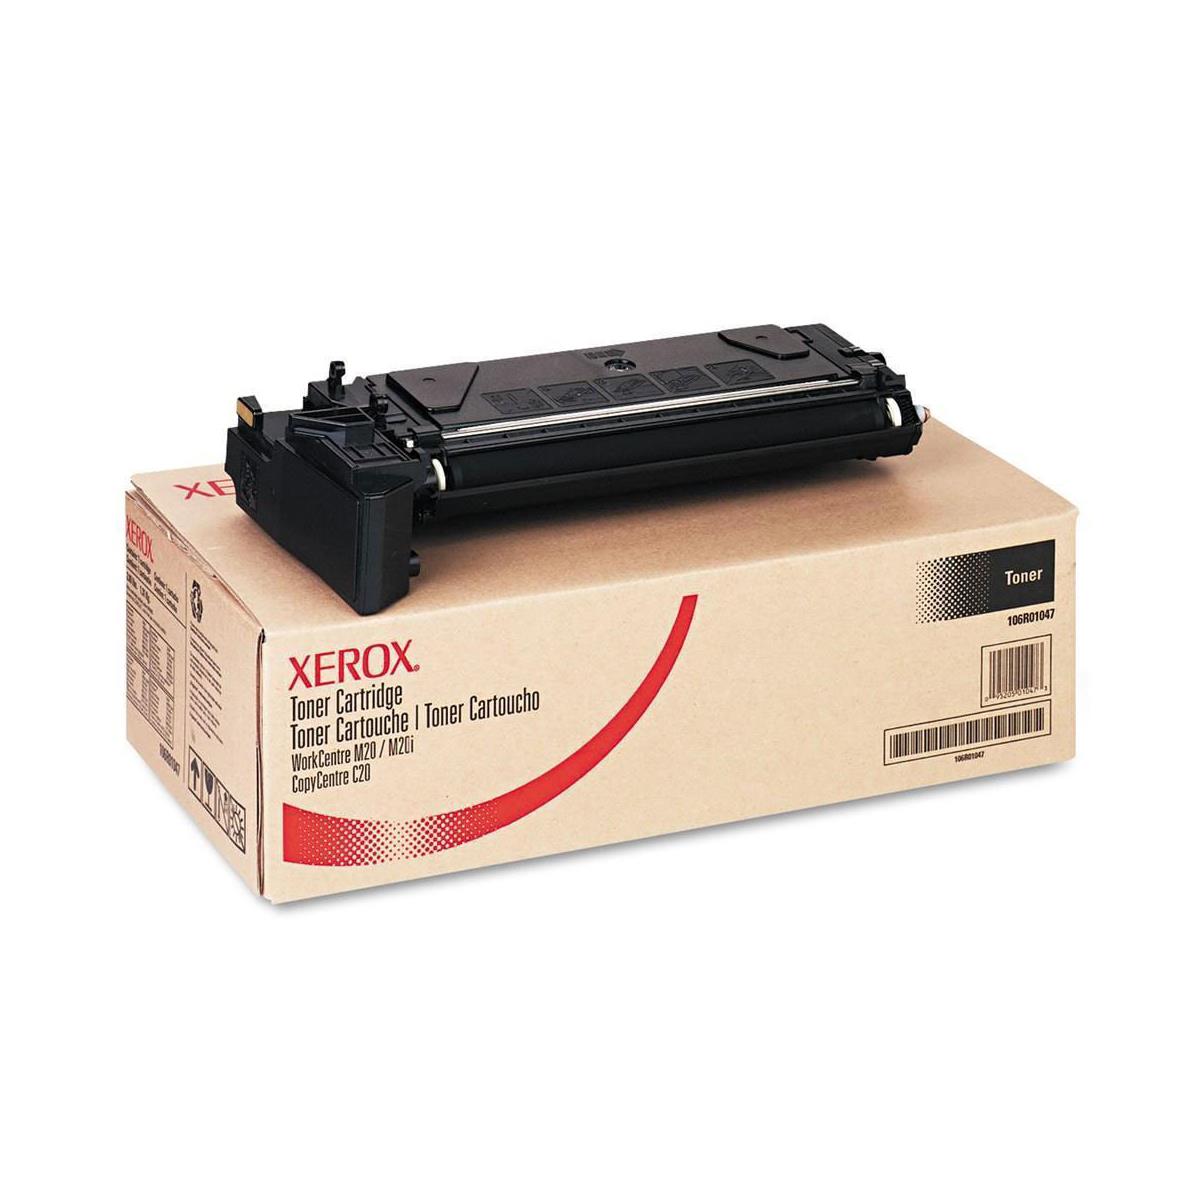 Xerox 106R01047 Toner Cartridge for Select CopyCentre and WorkCentre Series Xerox 106R01047 Toner Cartridge C20/M20/M20I for CopyCentre C20 is specially formulated and tested to provide the best image quality and most reliable printing you can count on page after page.